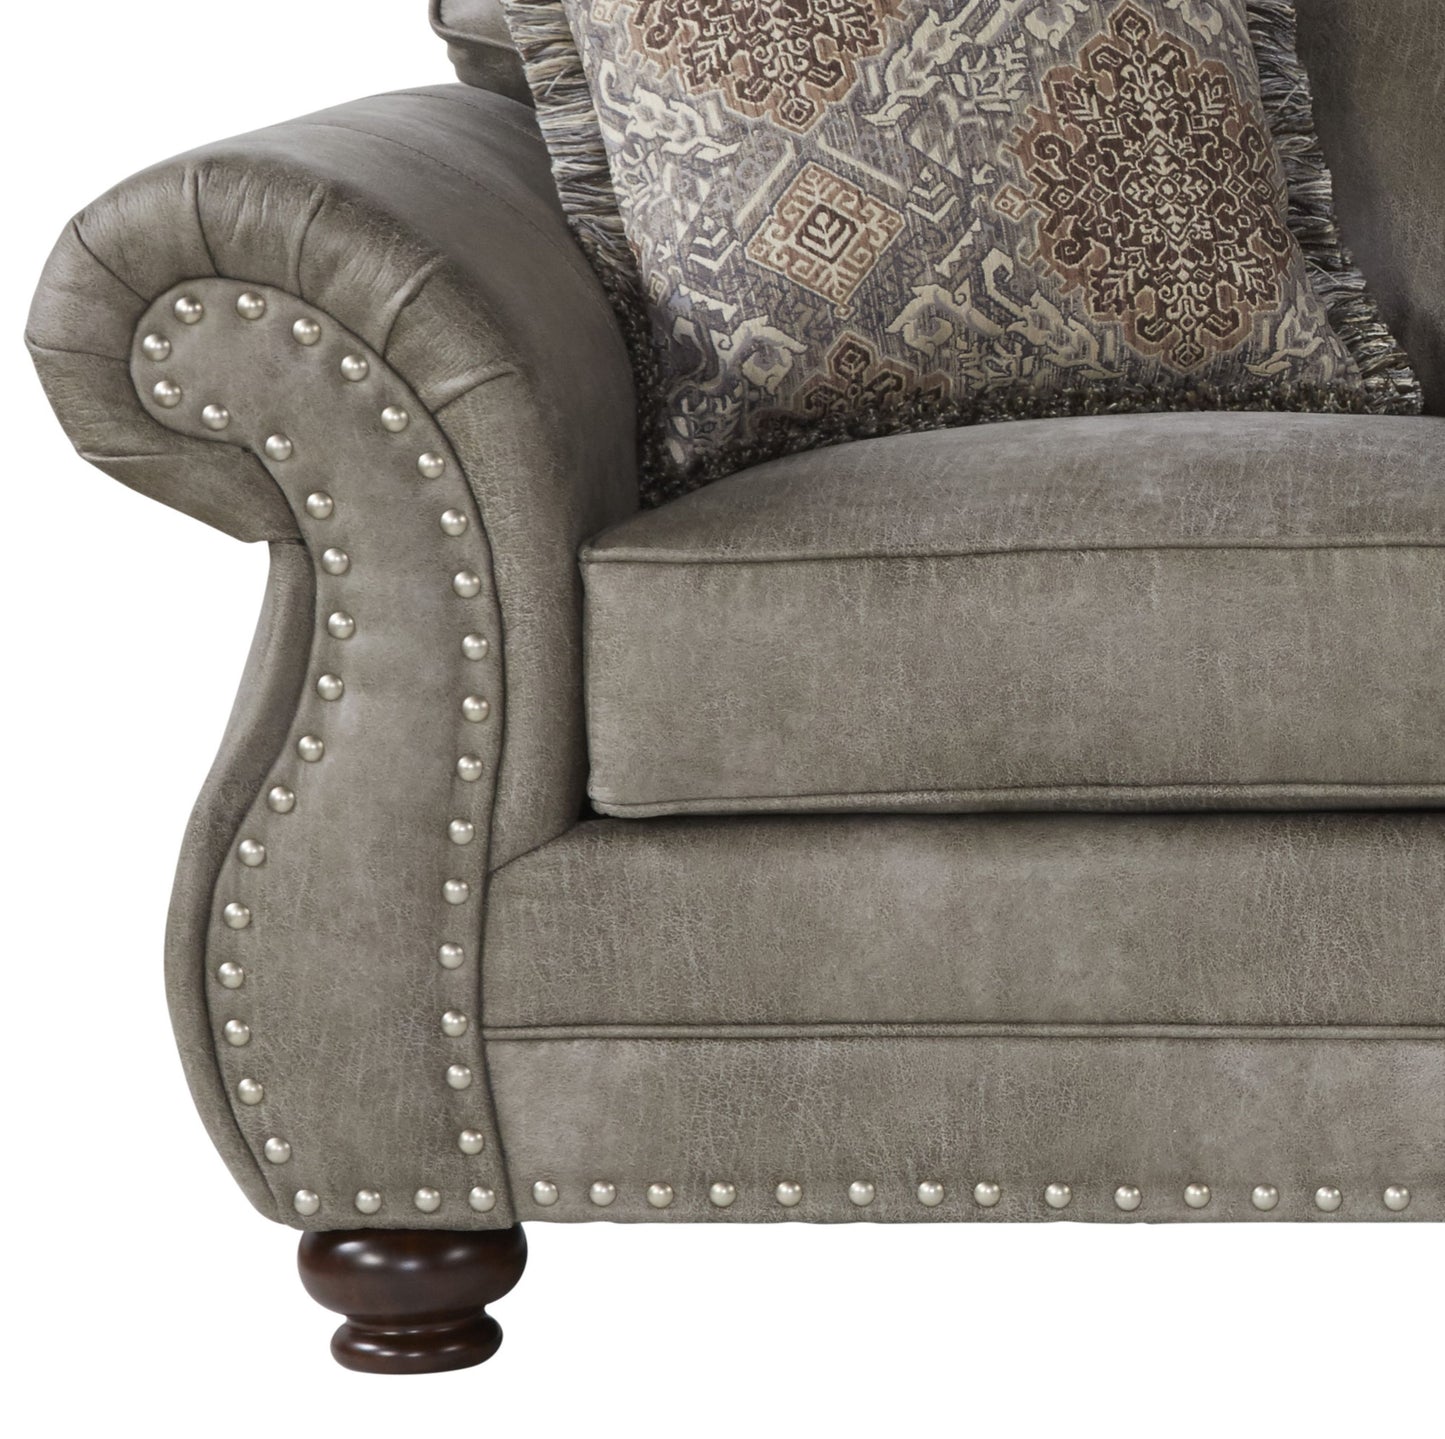 Leinster Faux Leather Upholstered Nailhead Sofa in Stone Gray